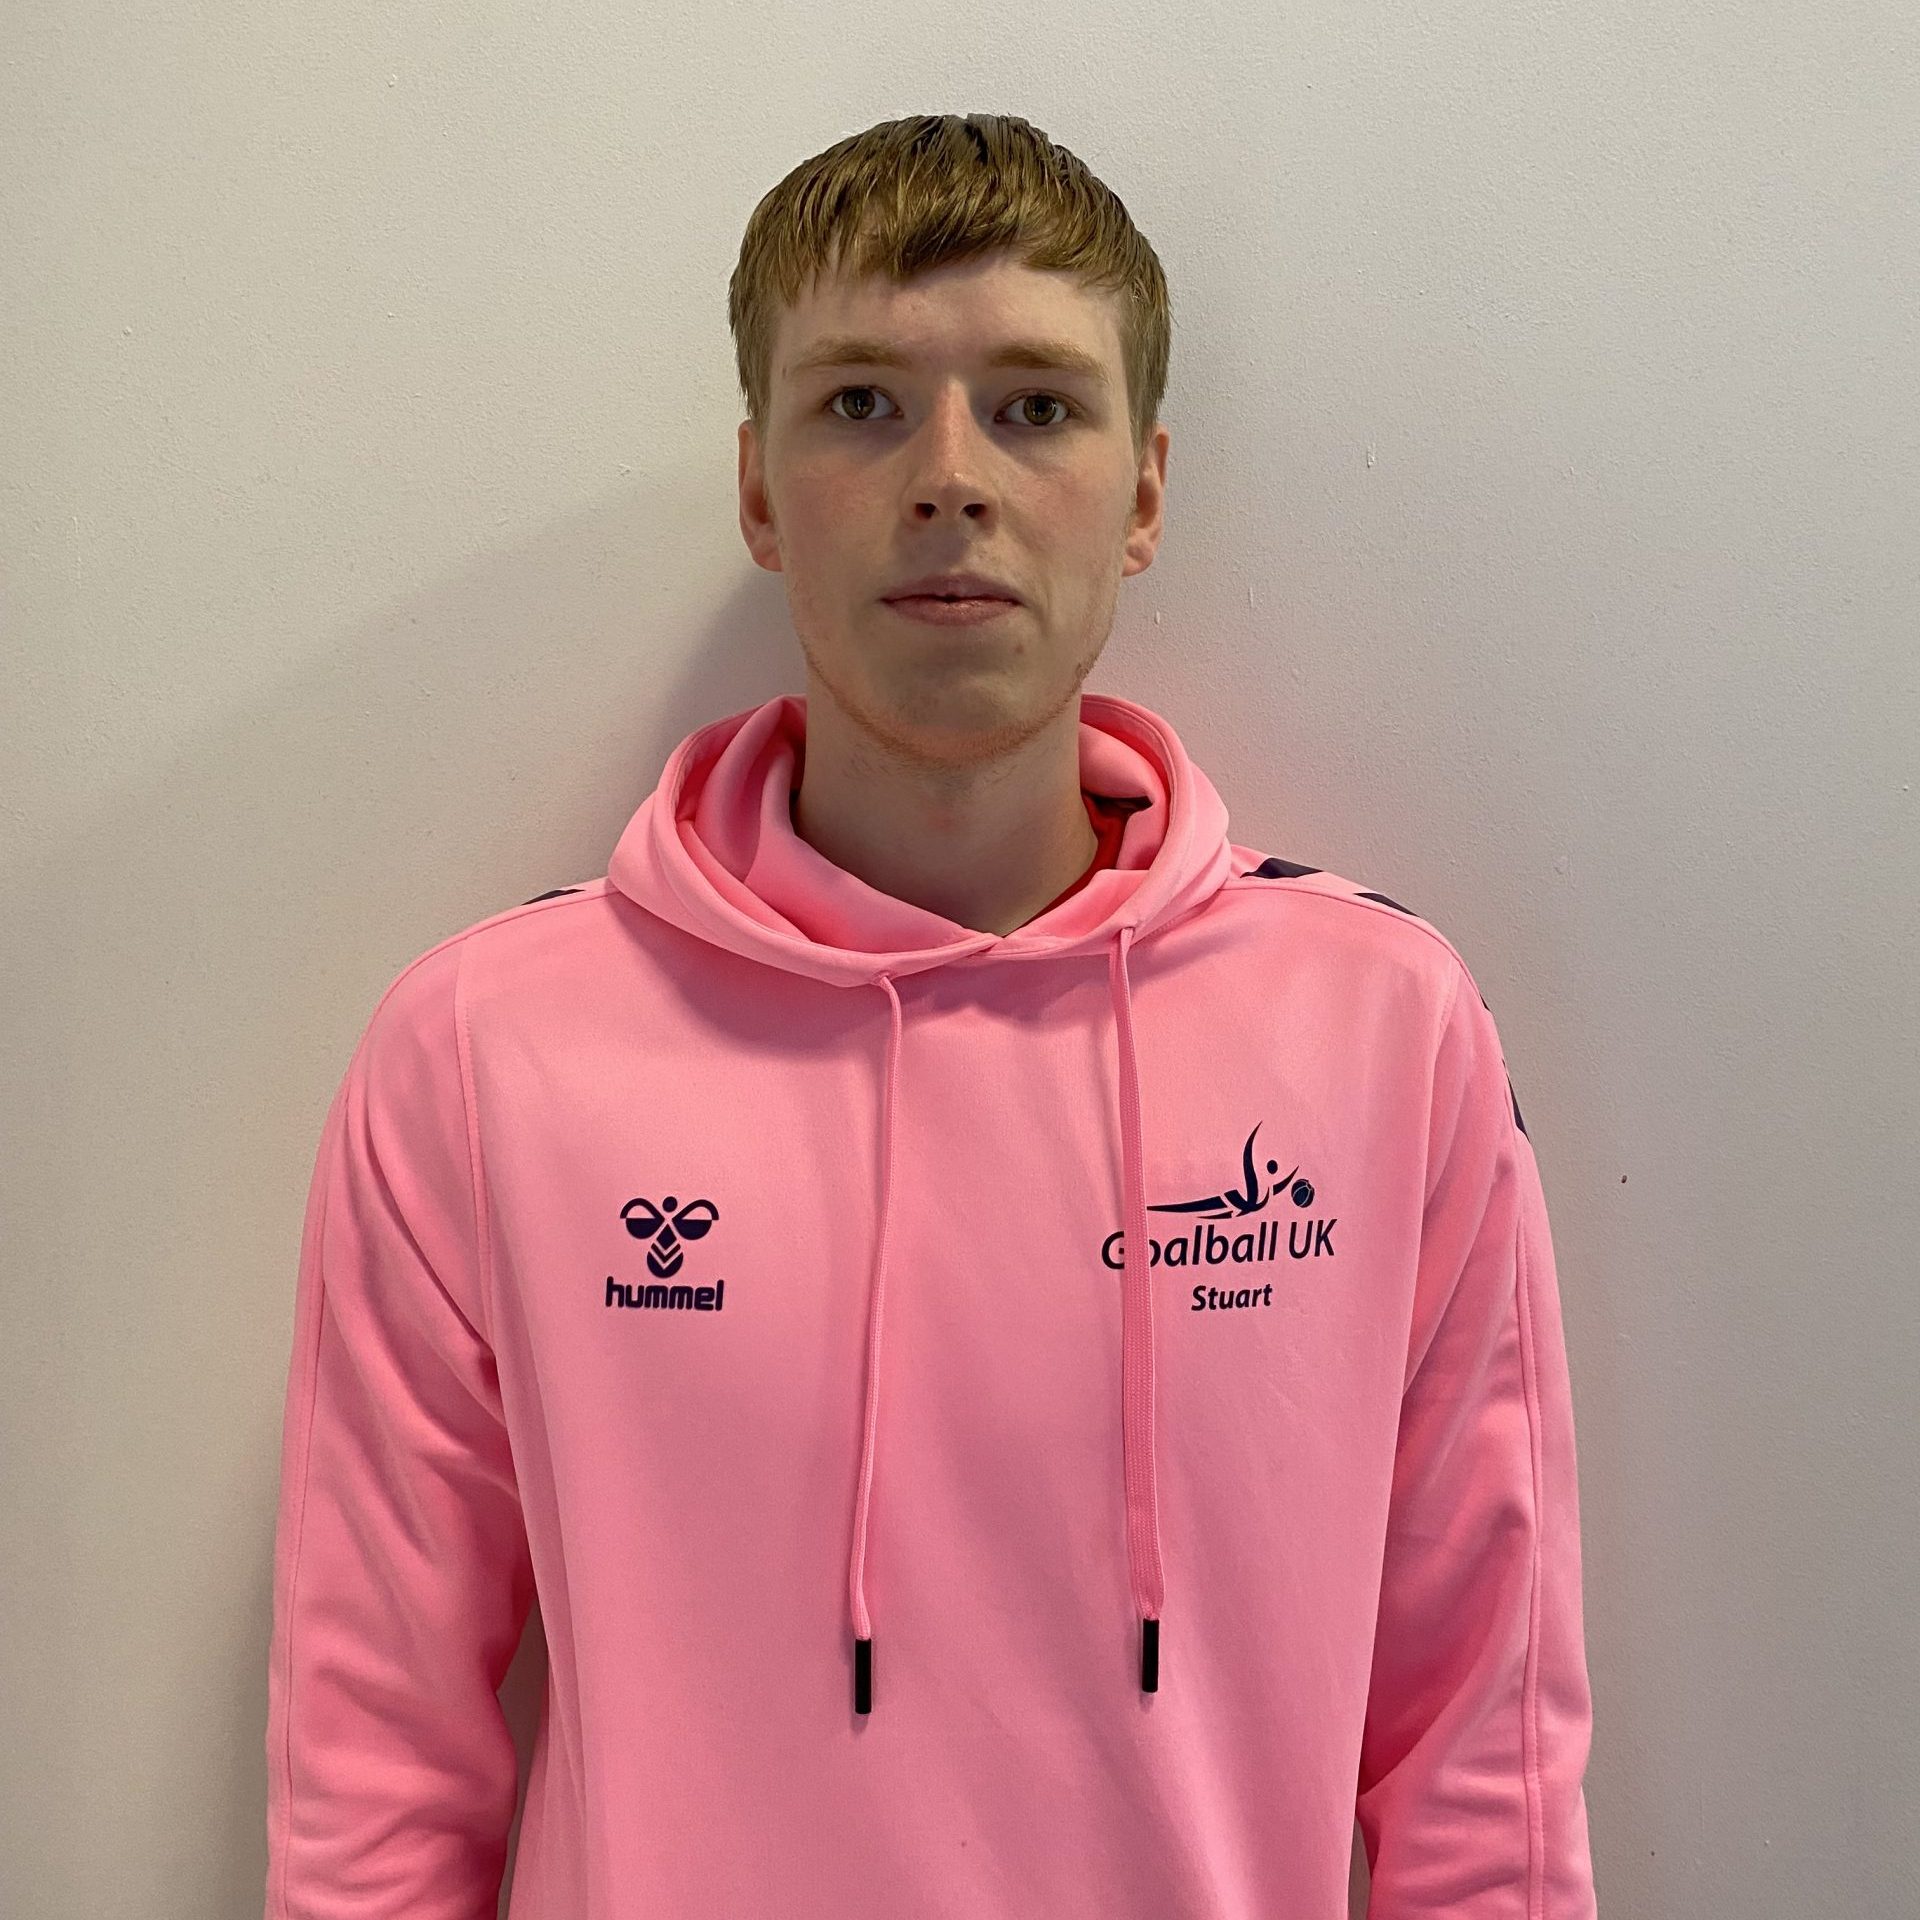 Stuart Hudson in his pink youth forum hoodie